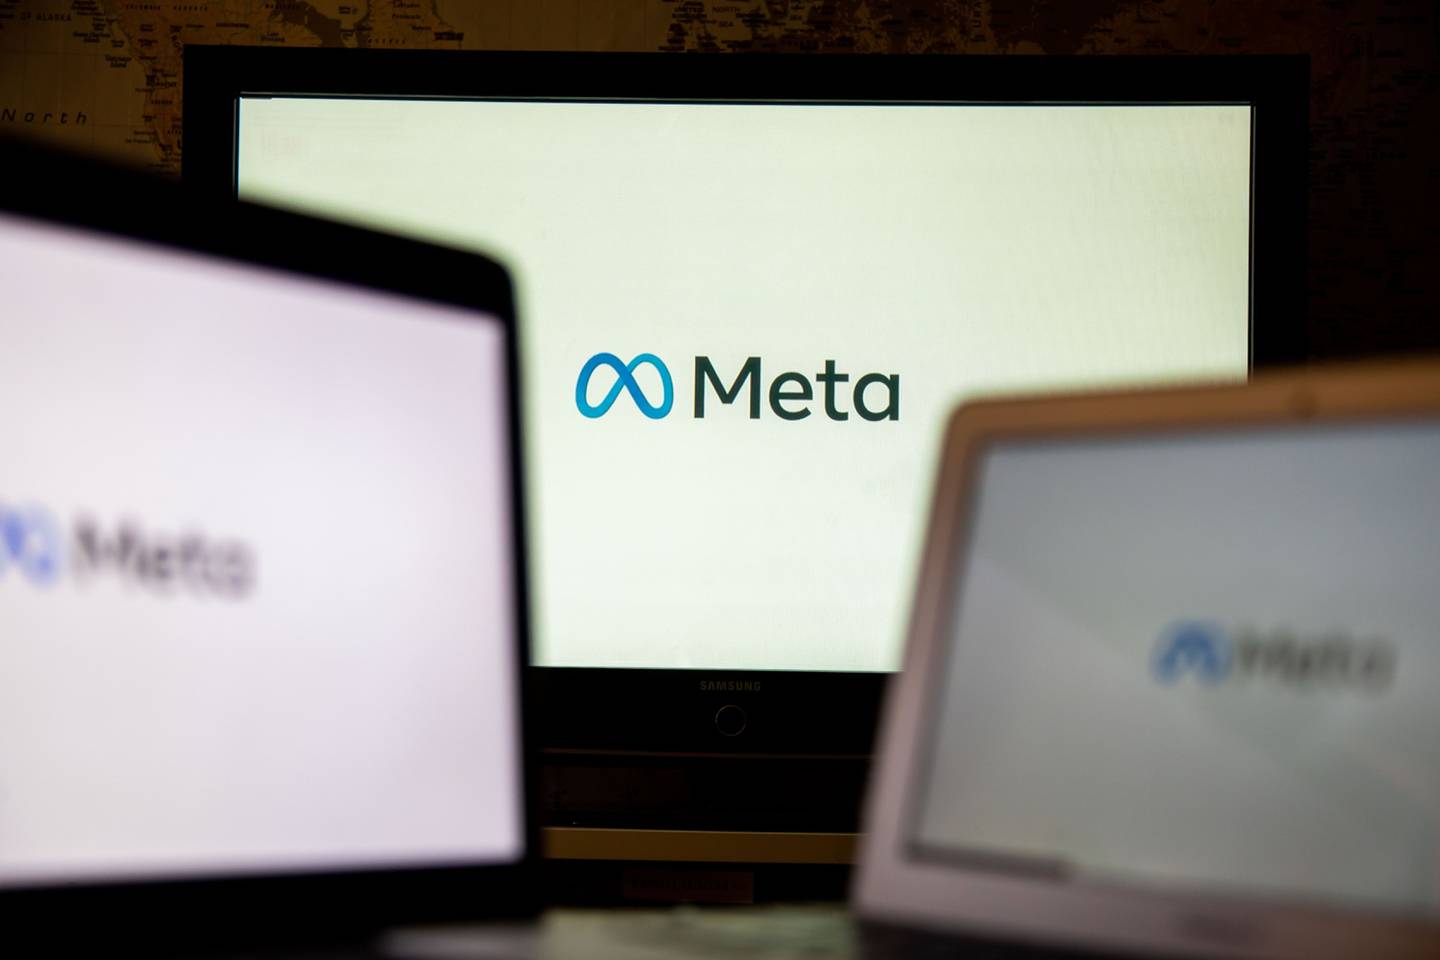 Meta Platforms Inc. signage during the virtual Meta Connect event in New York, US, on Tuesday, Oct. 11, 2022. Mark Zuckerberg unveiled his company's newest virtual-reality headset, the Meta Quest Pro, the latest foray into the world of high-end VR devices that Meta Platforms hopes will entice creators and working professionals to adopt its vision for a virtual future. Photographer: Michael Nagle/Bloomberg